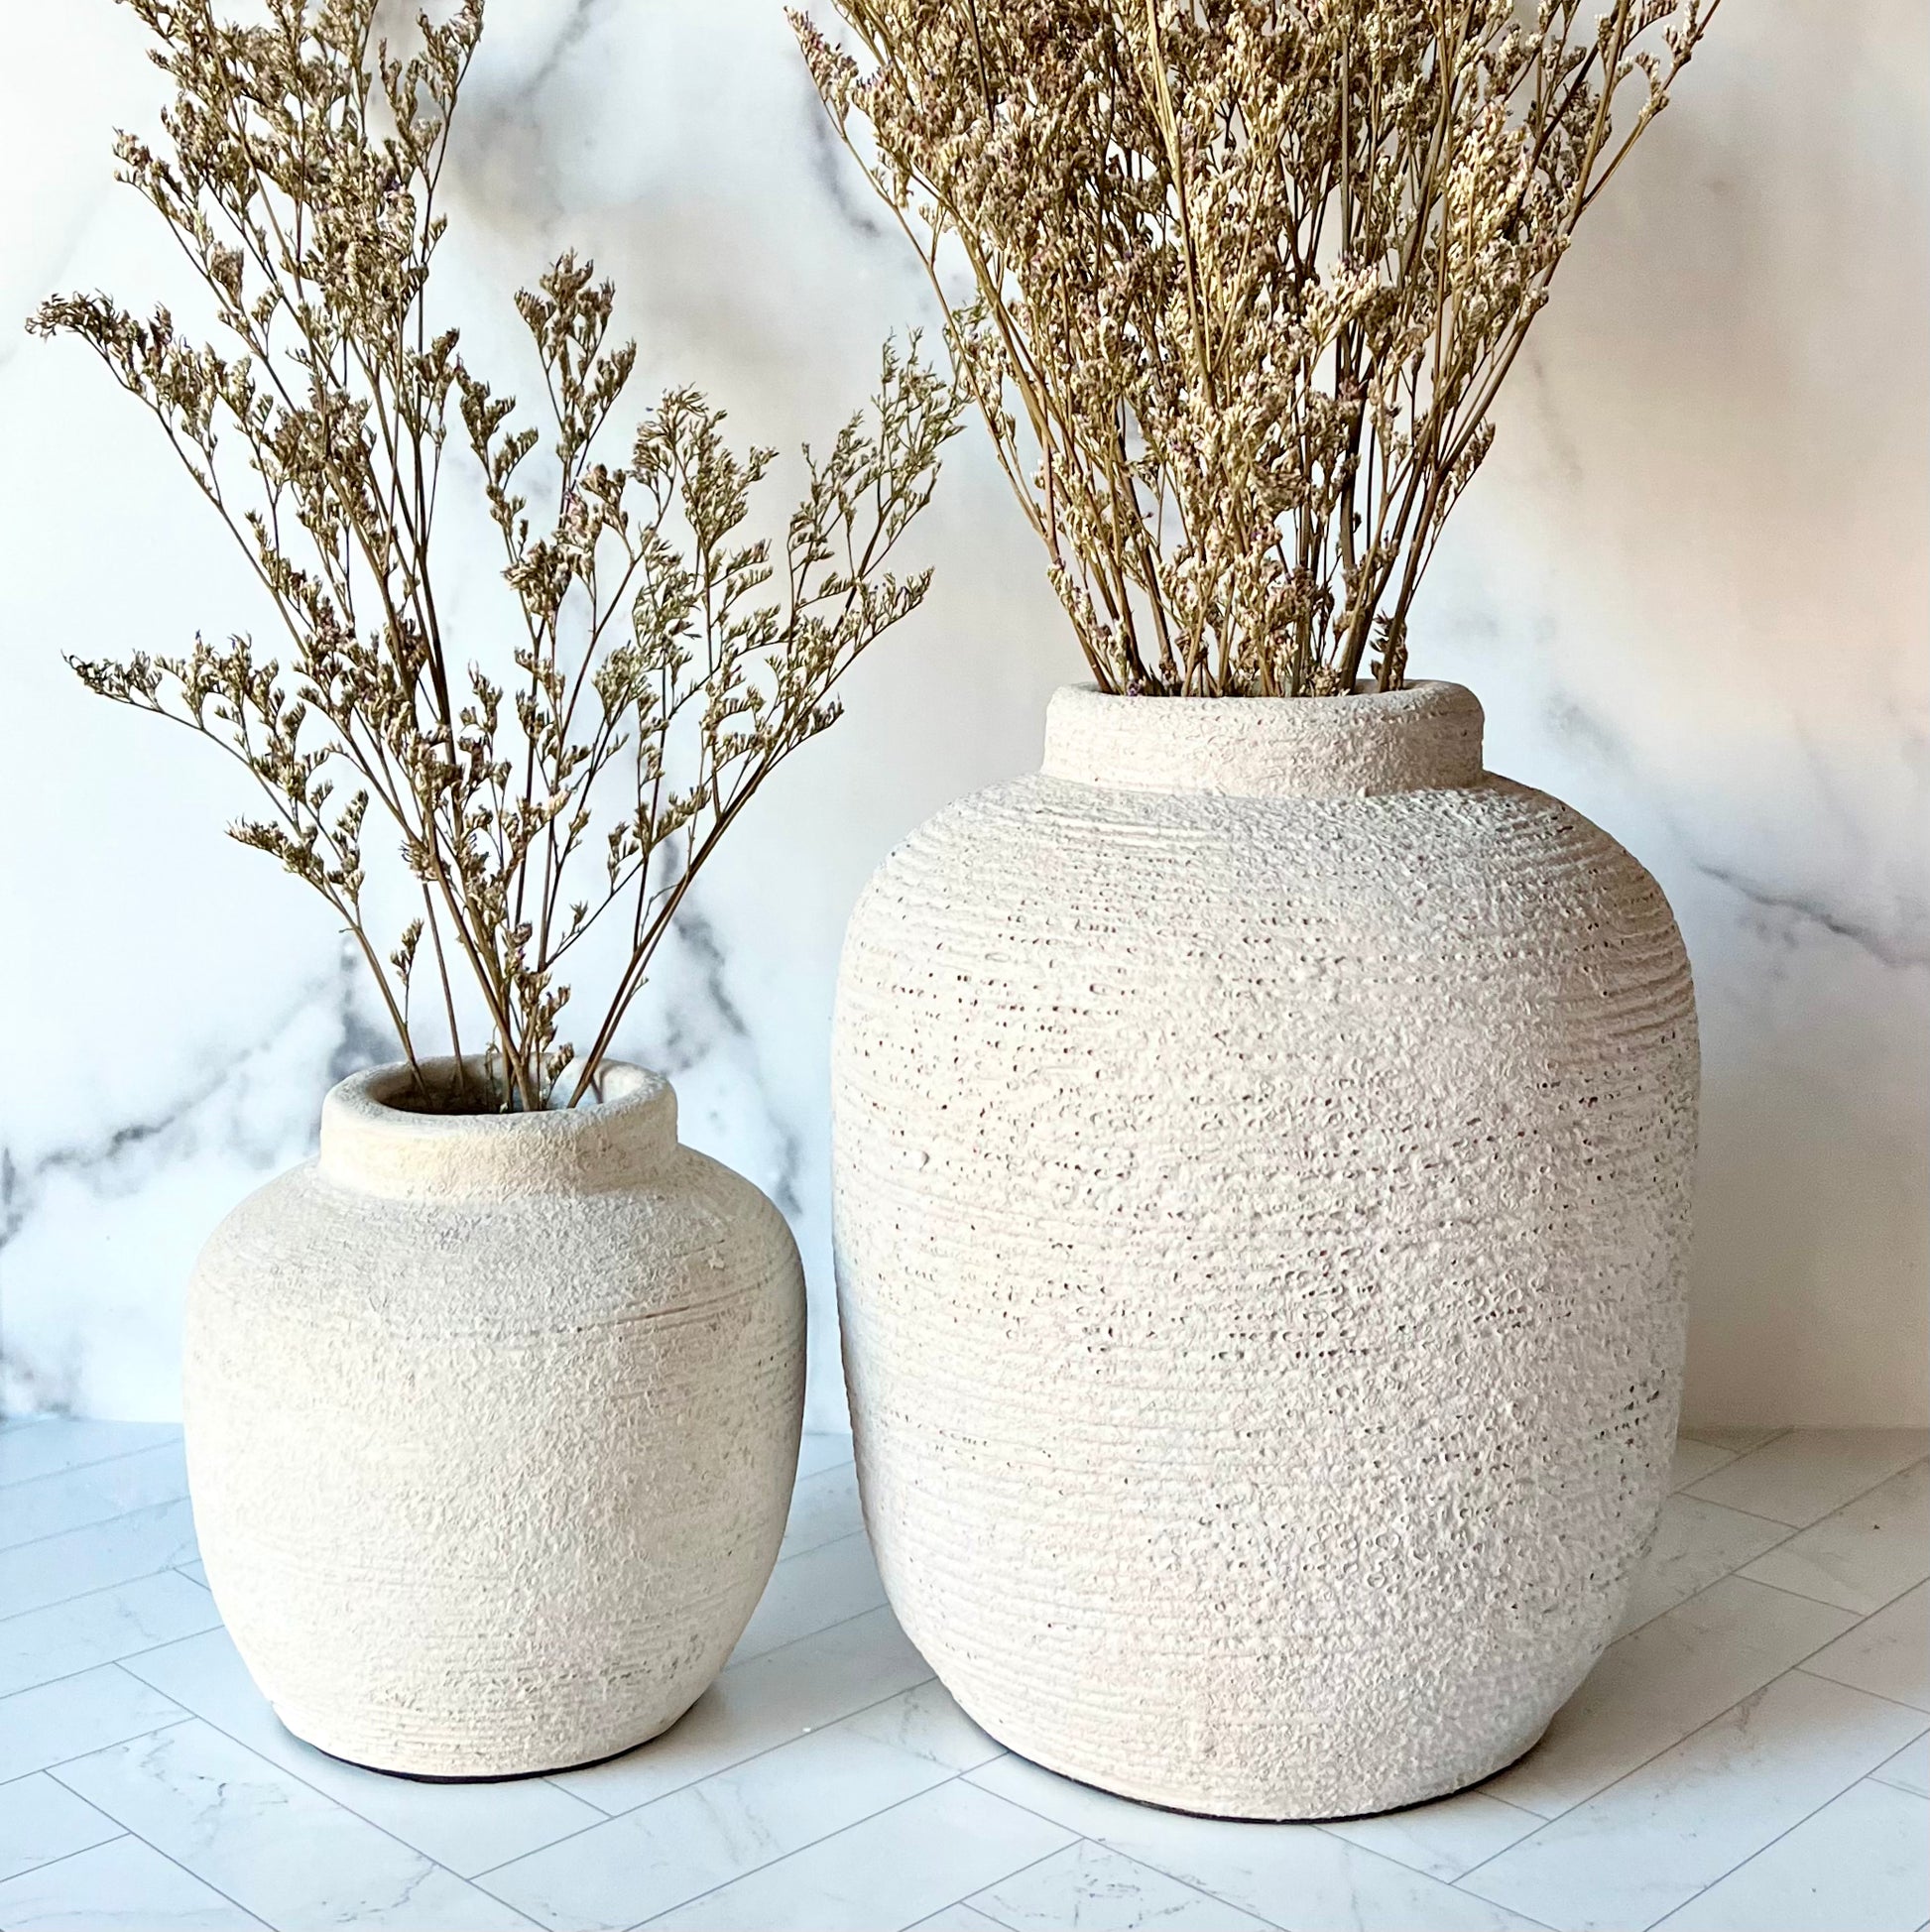 A large gray vase next to a small gray vase, both filled with dried flowers